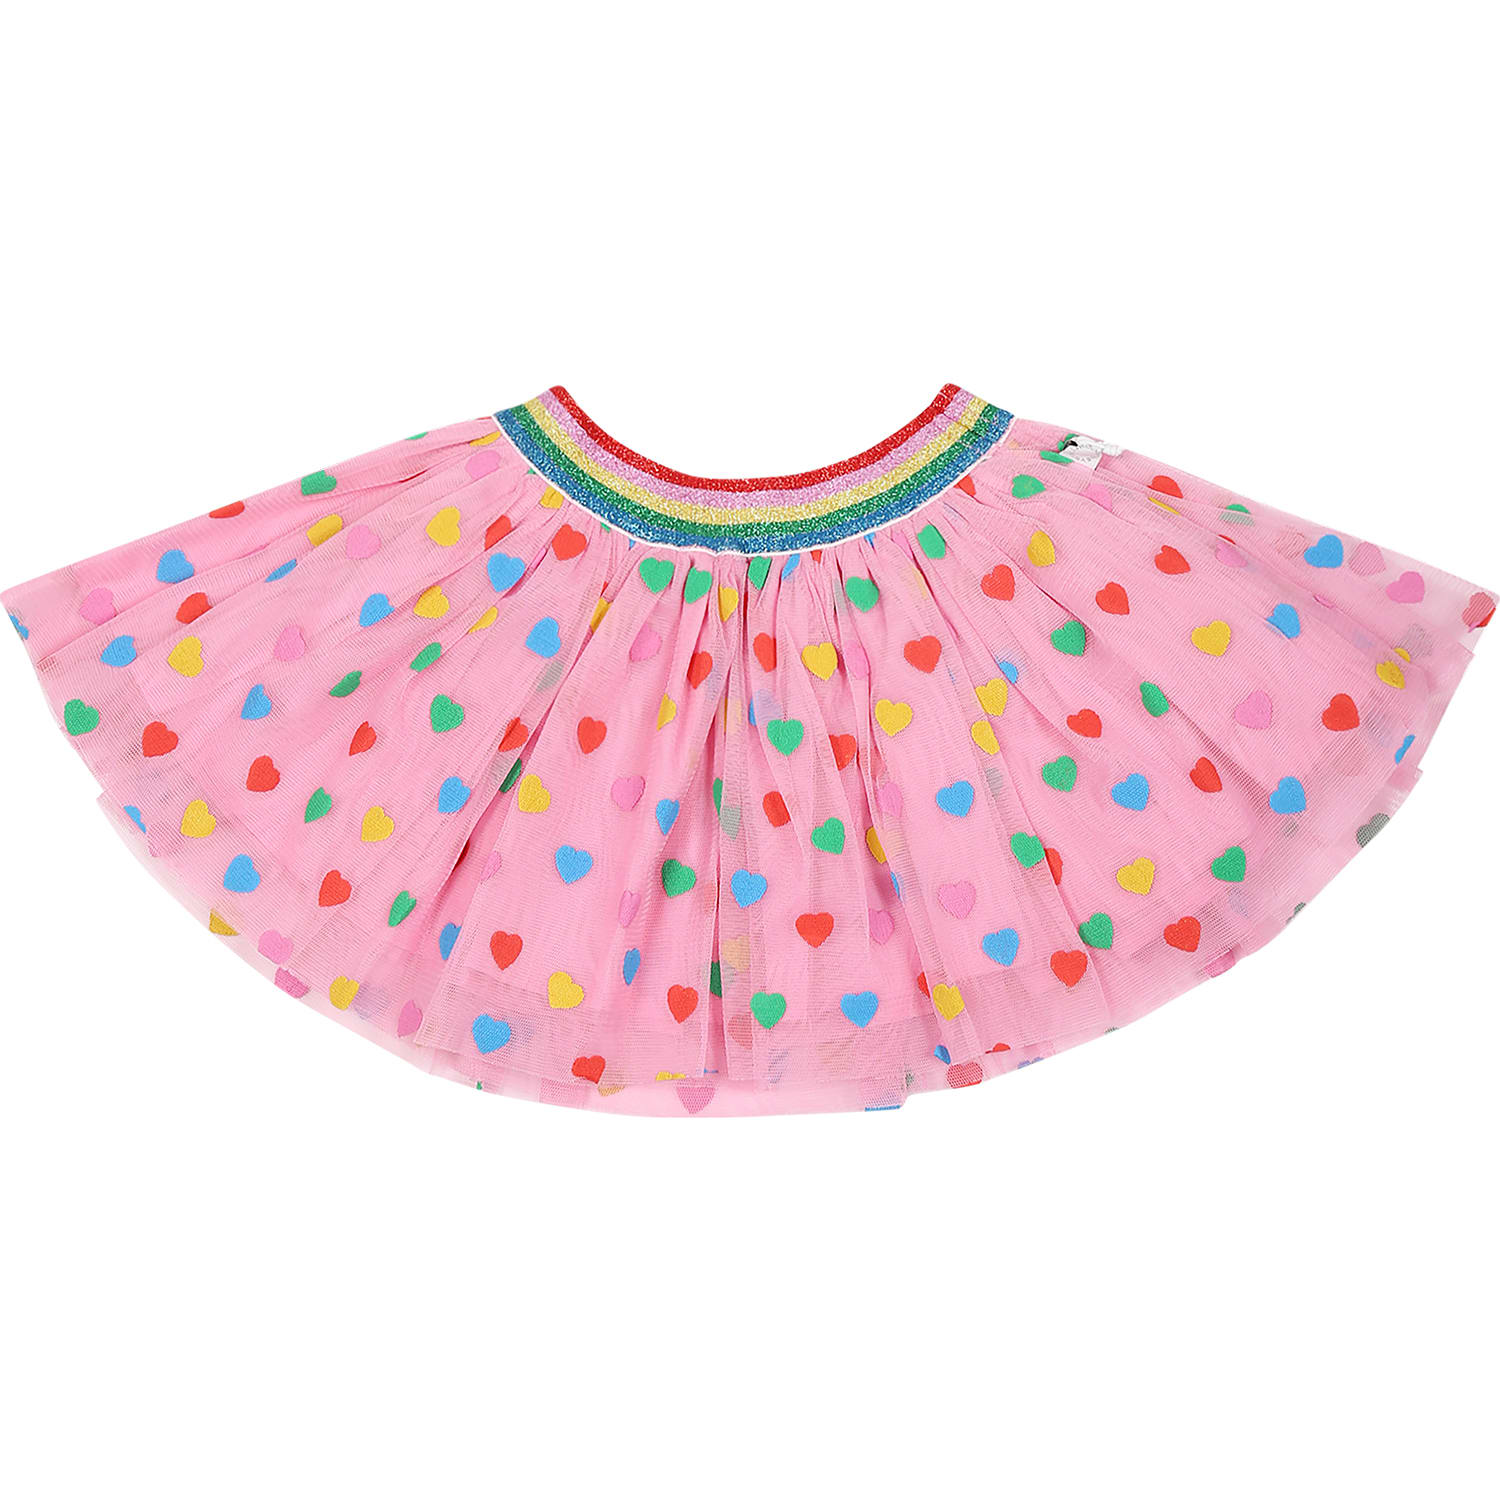 Stella Mccartney Pink Skirt For Baby Girl With Hearts